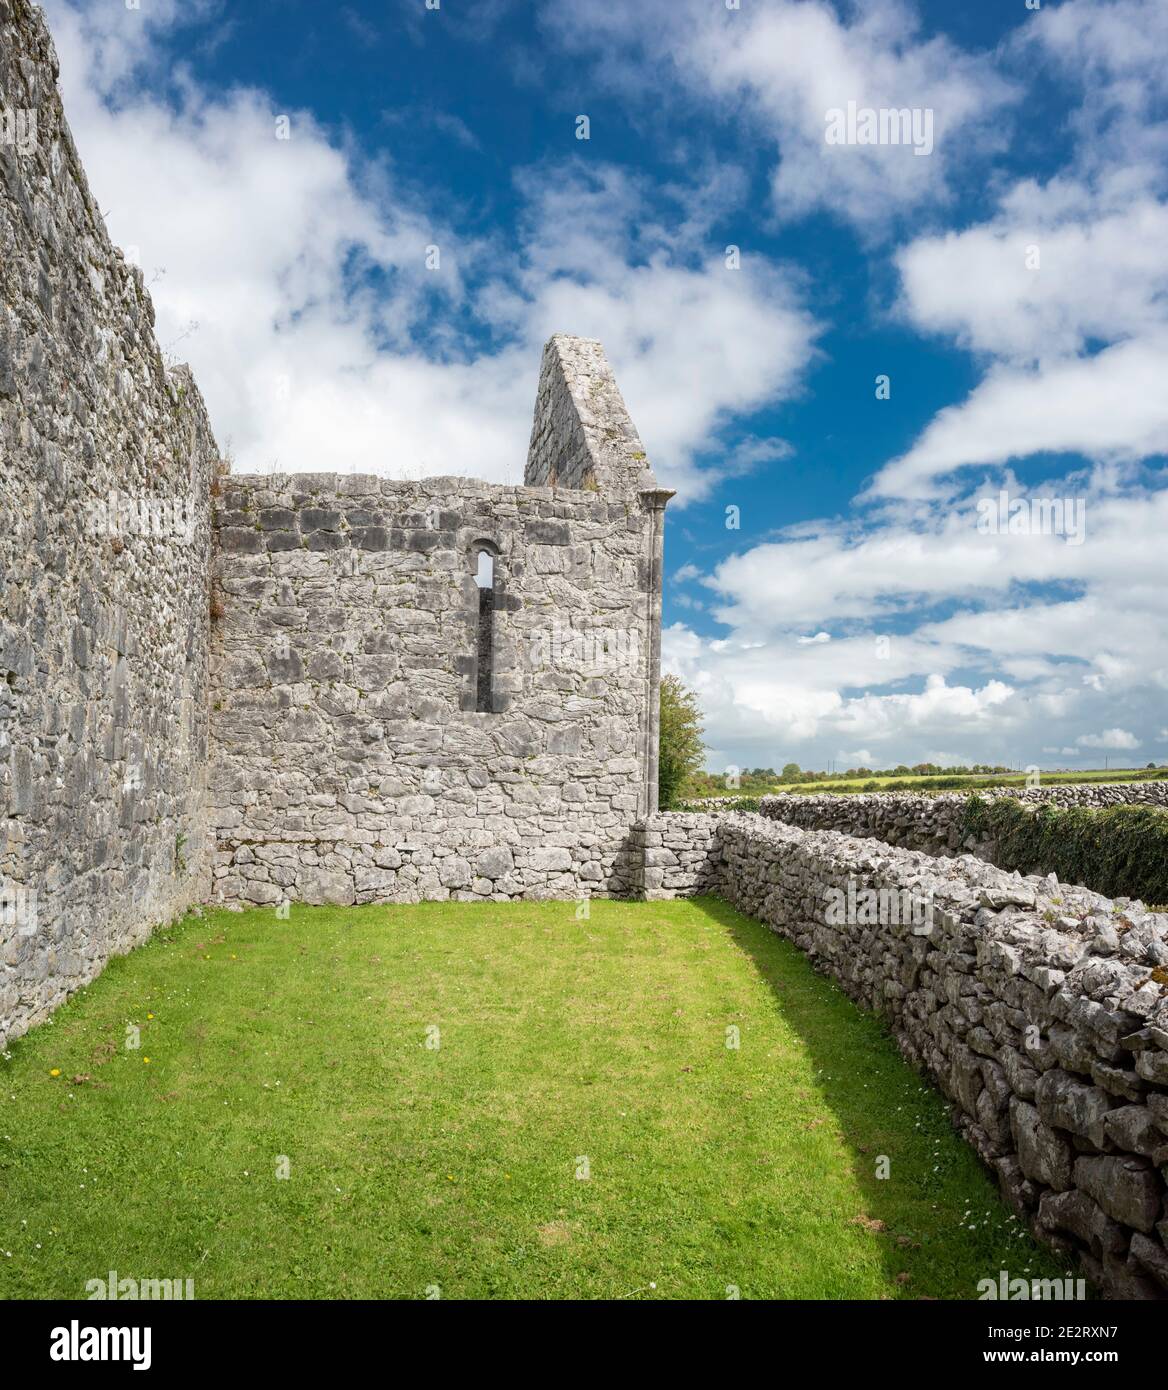 Ruined buildings and stone walls constucted from Carboniferous limestone at the 7th century Kilmacduagh monastery near Gort, County Galway, Ireland Stock Photo